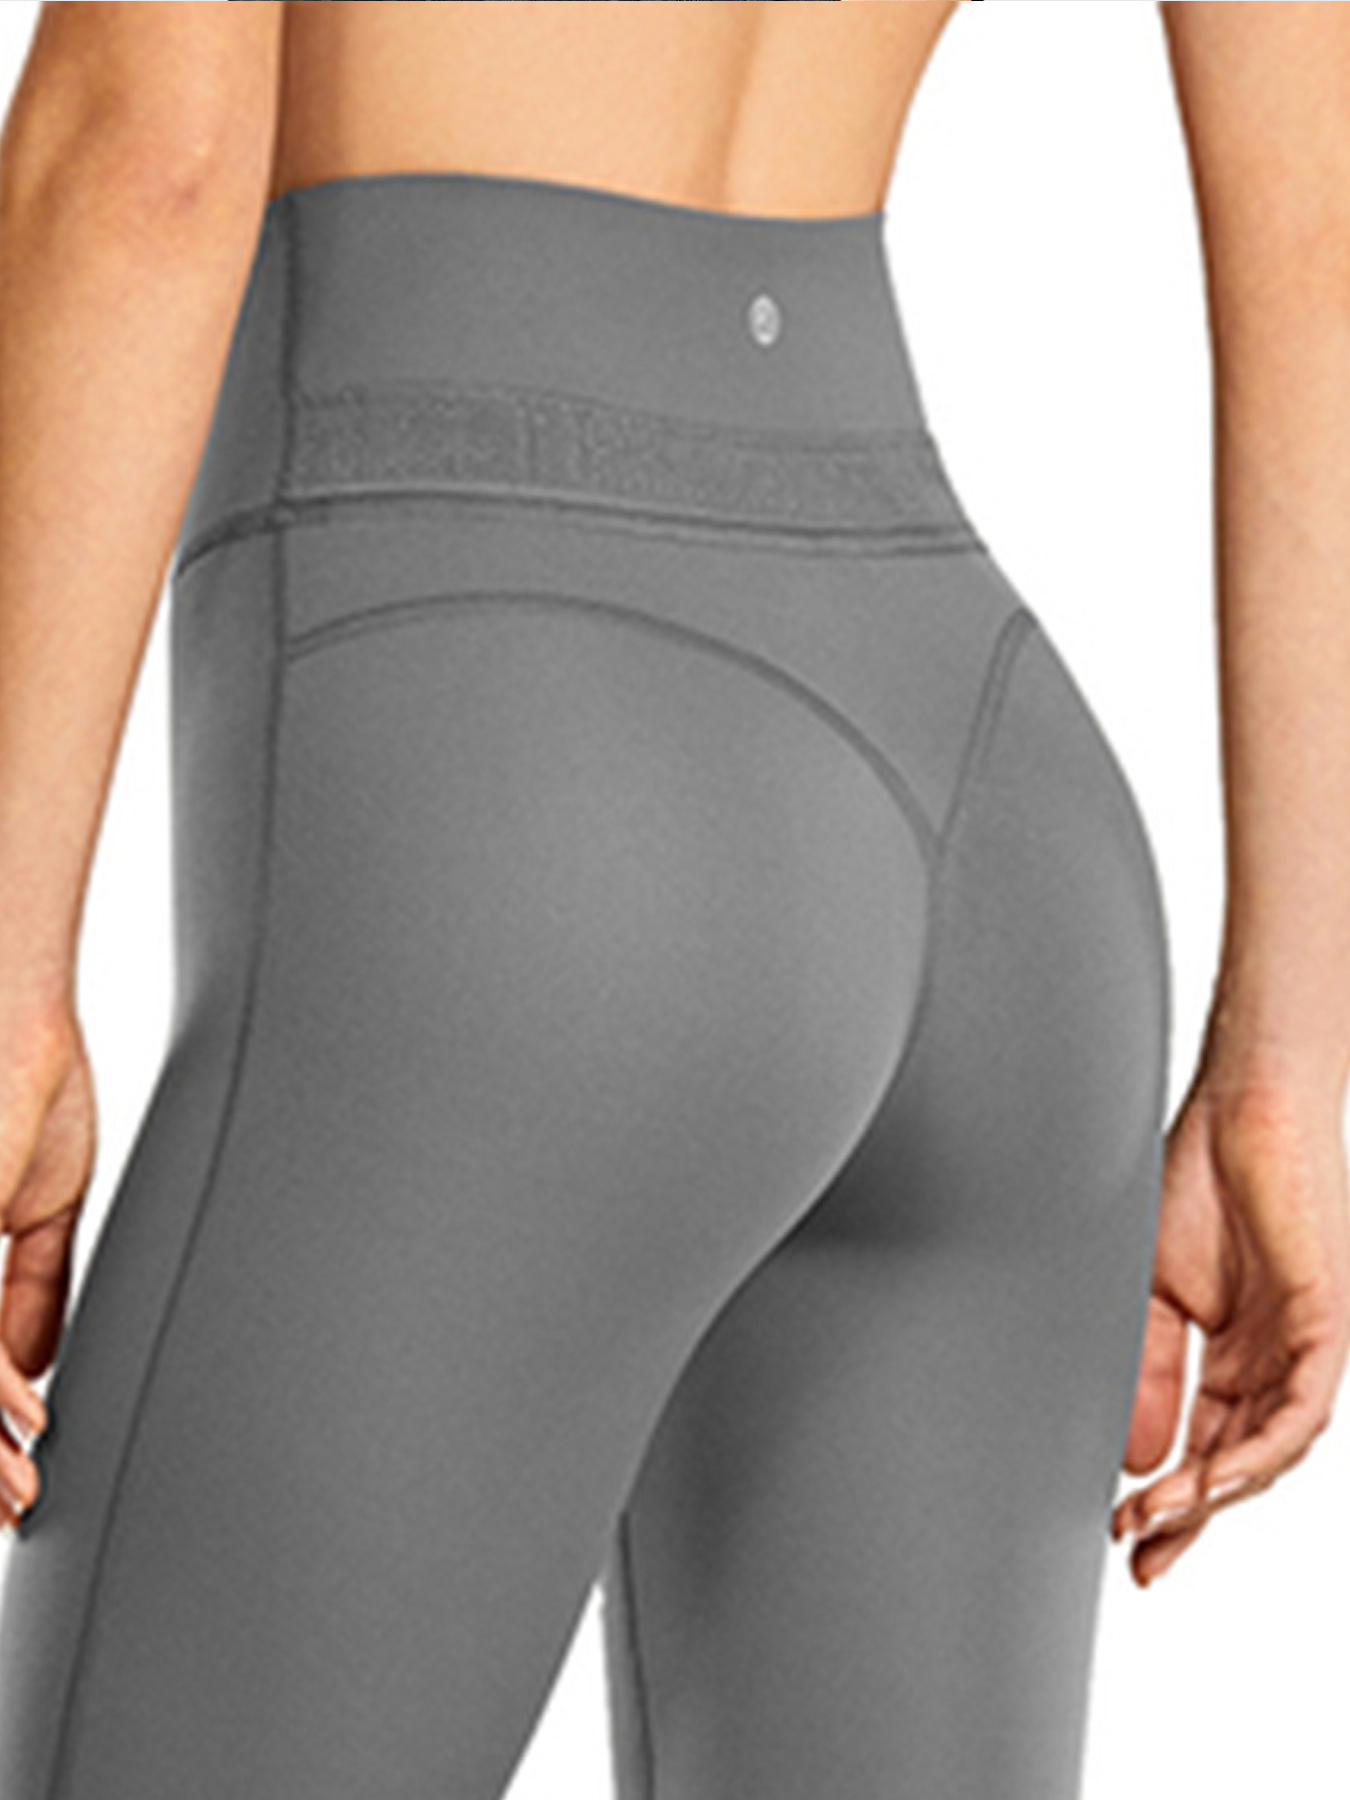 Customer reviews of thick high waist yoga pants #finds